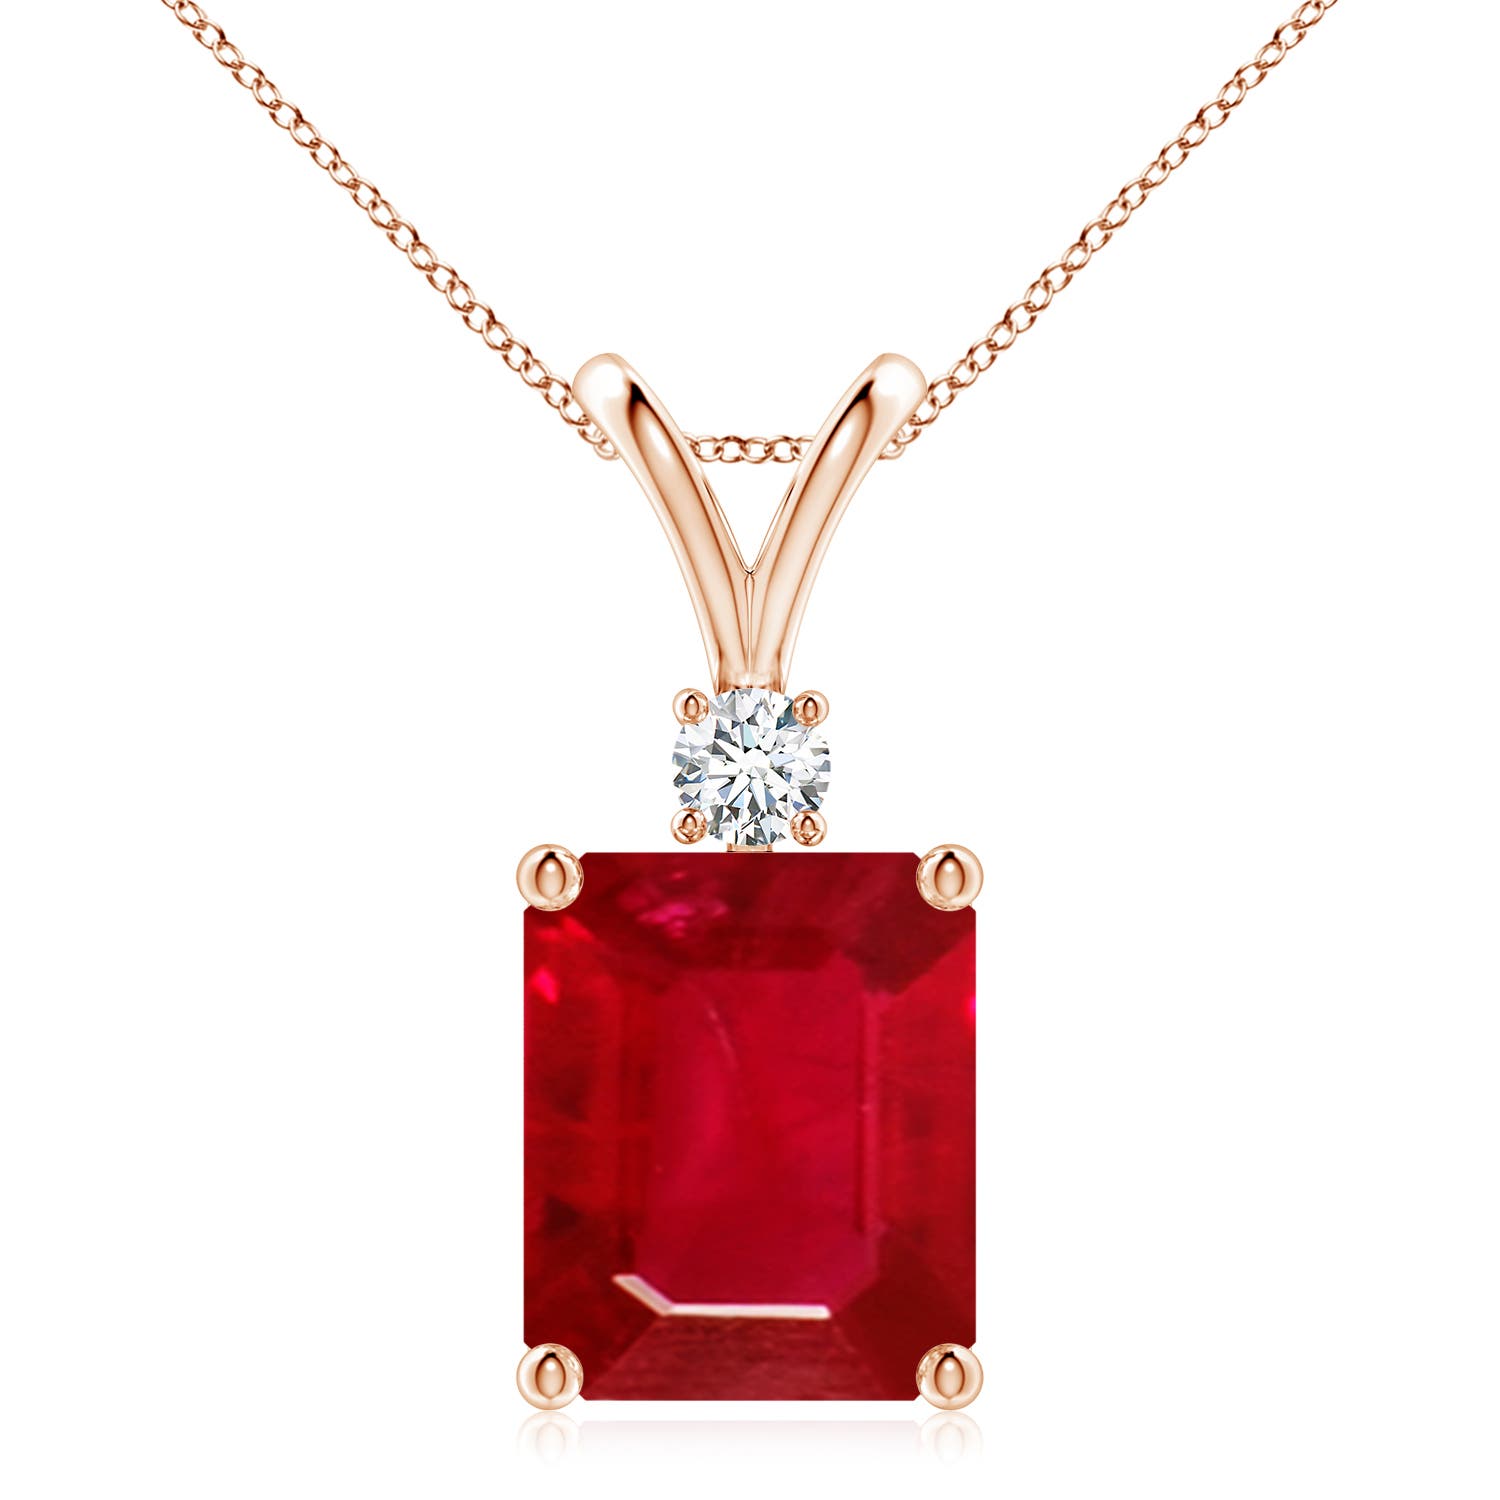 AAA - Ruby / 6.41 CT / 14 KT Rose Gold